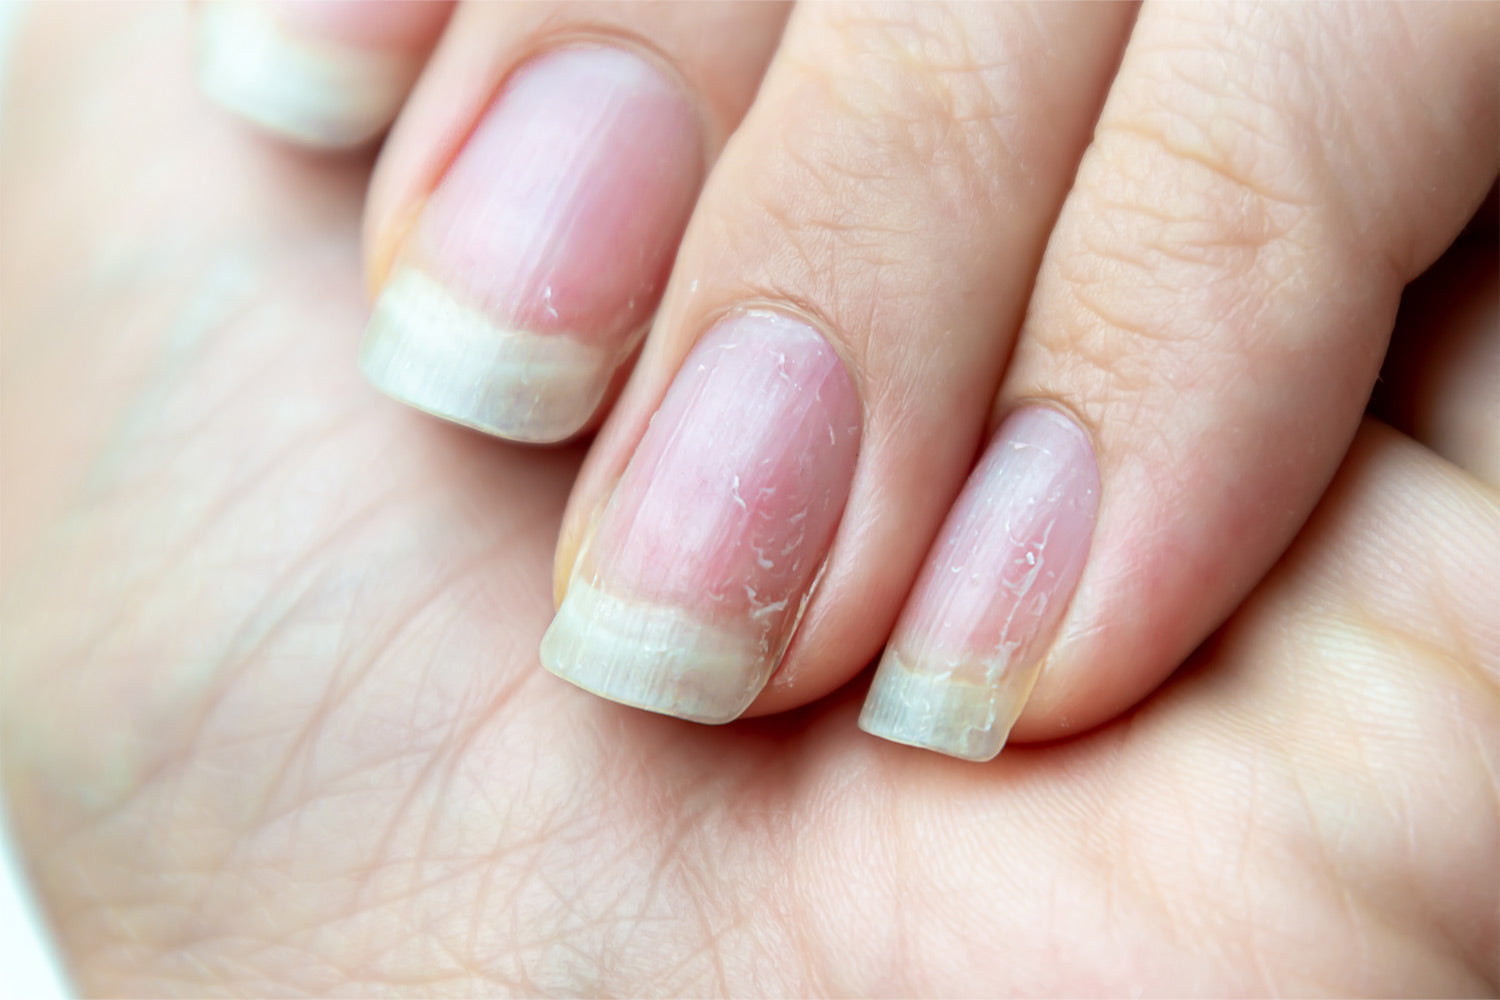 How To Grow Longer Nails Fast With Home Remedies